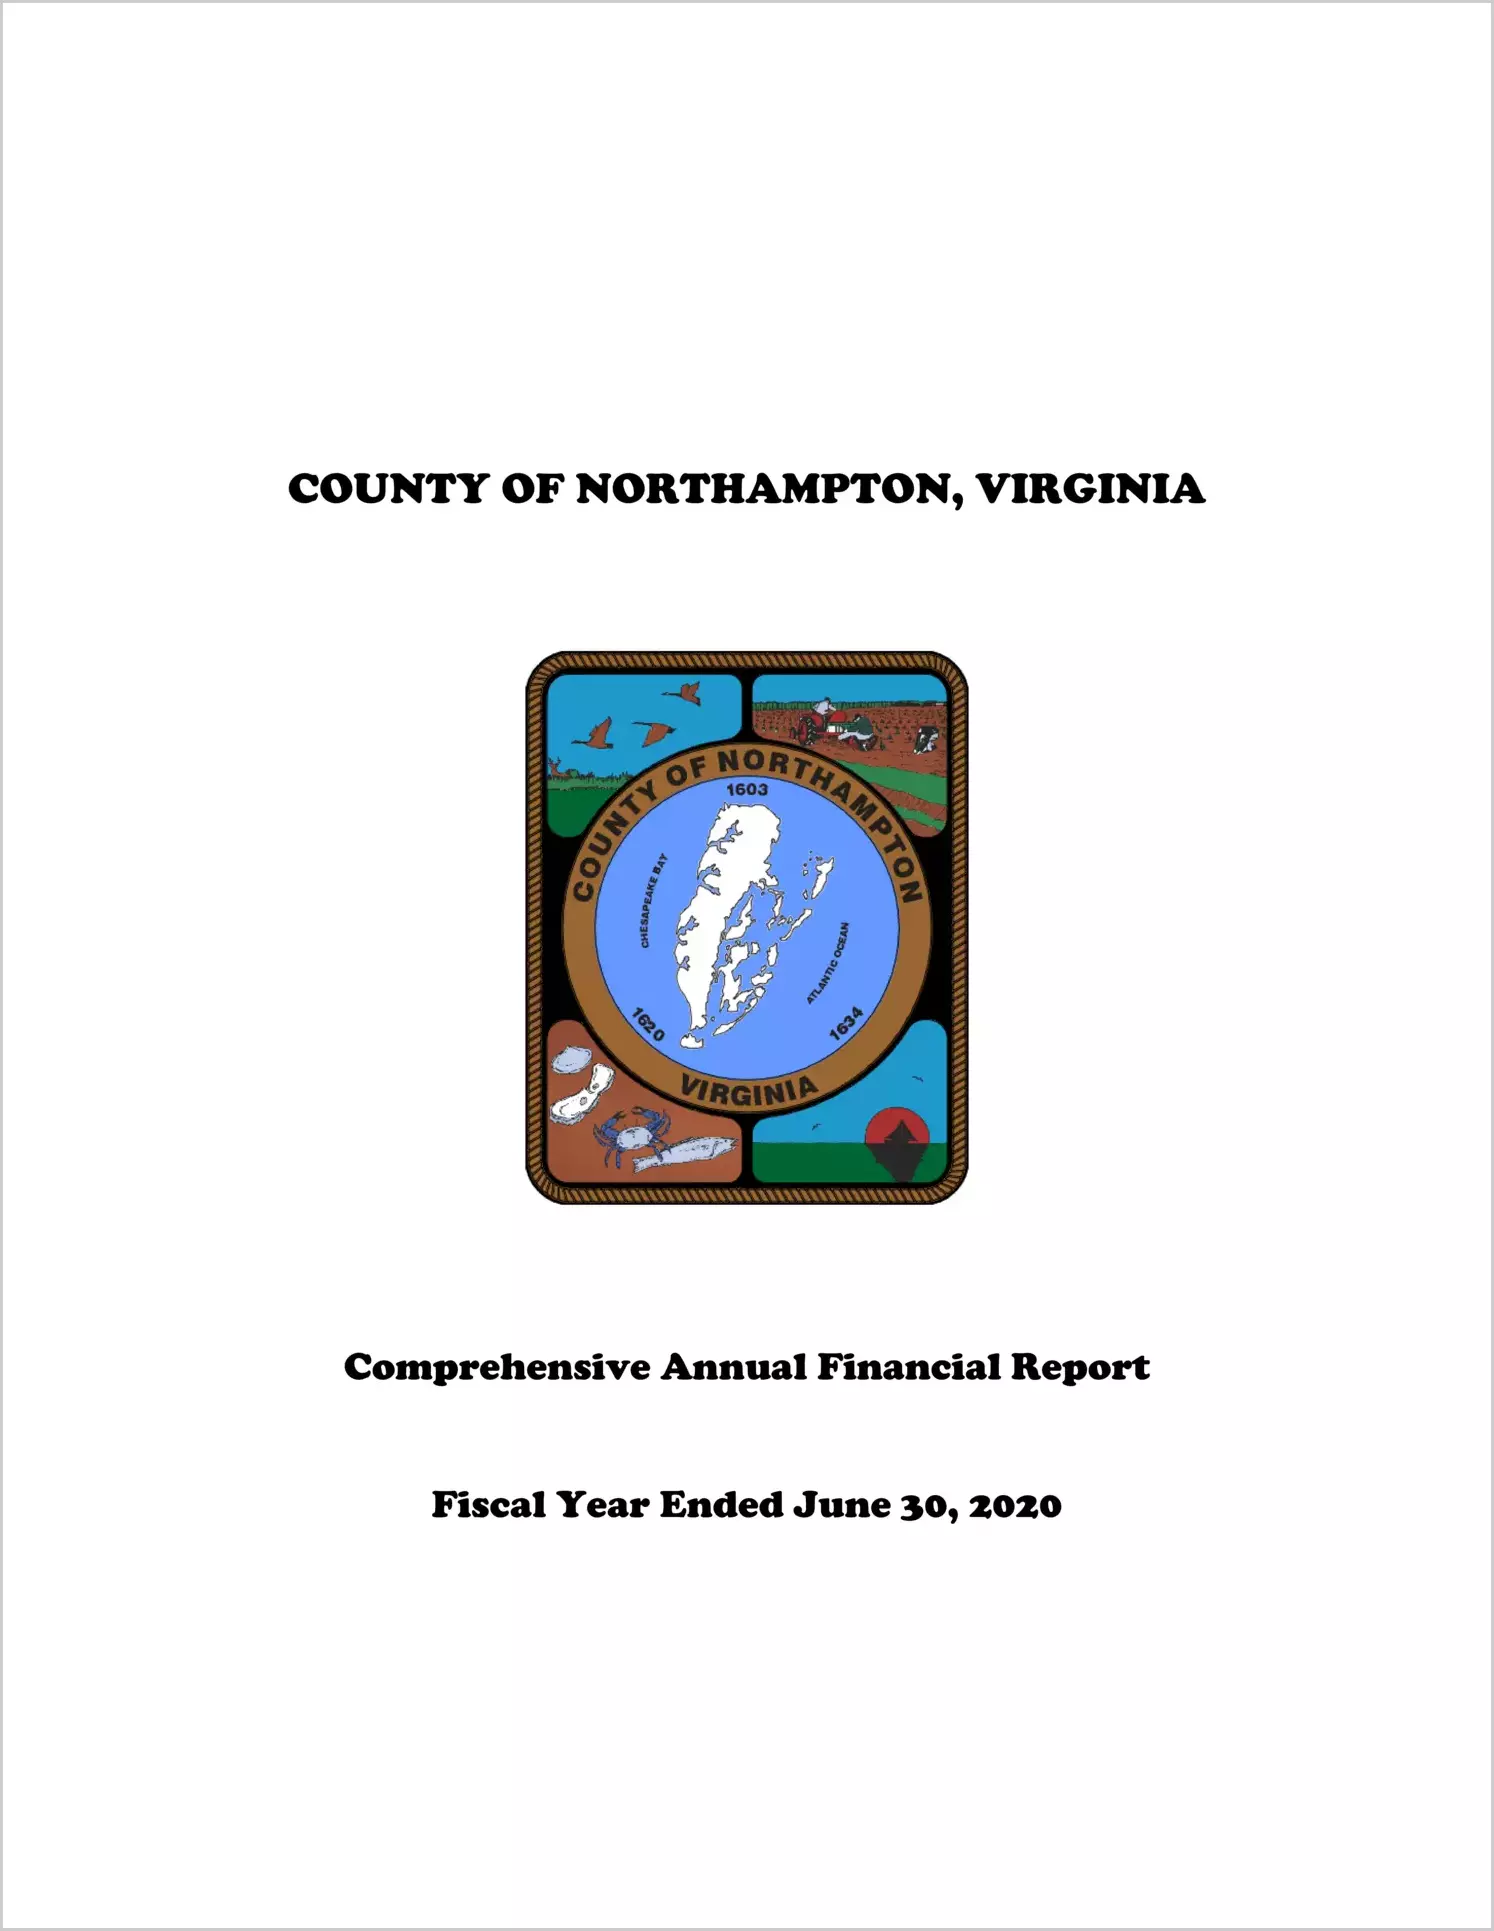 2020 Annual Financial Report for County of Northampton